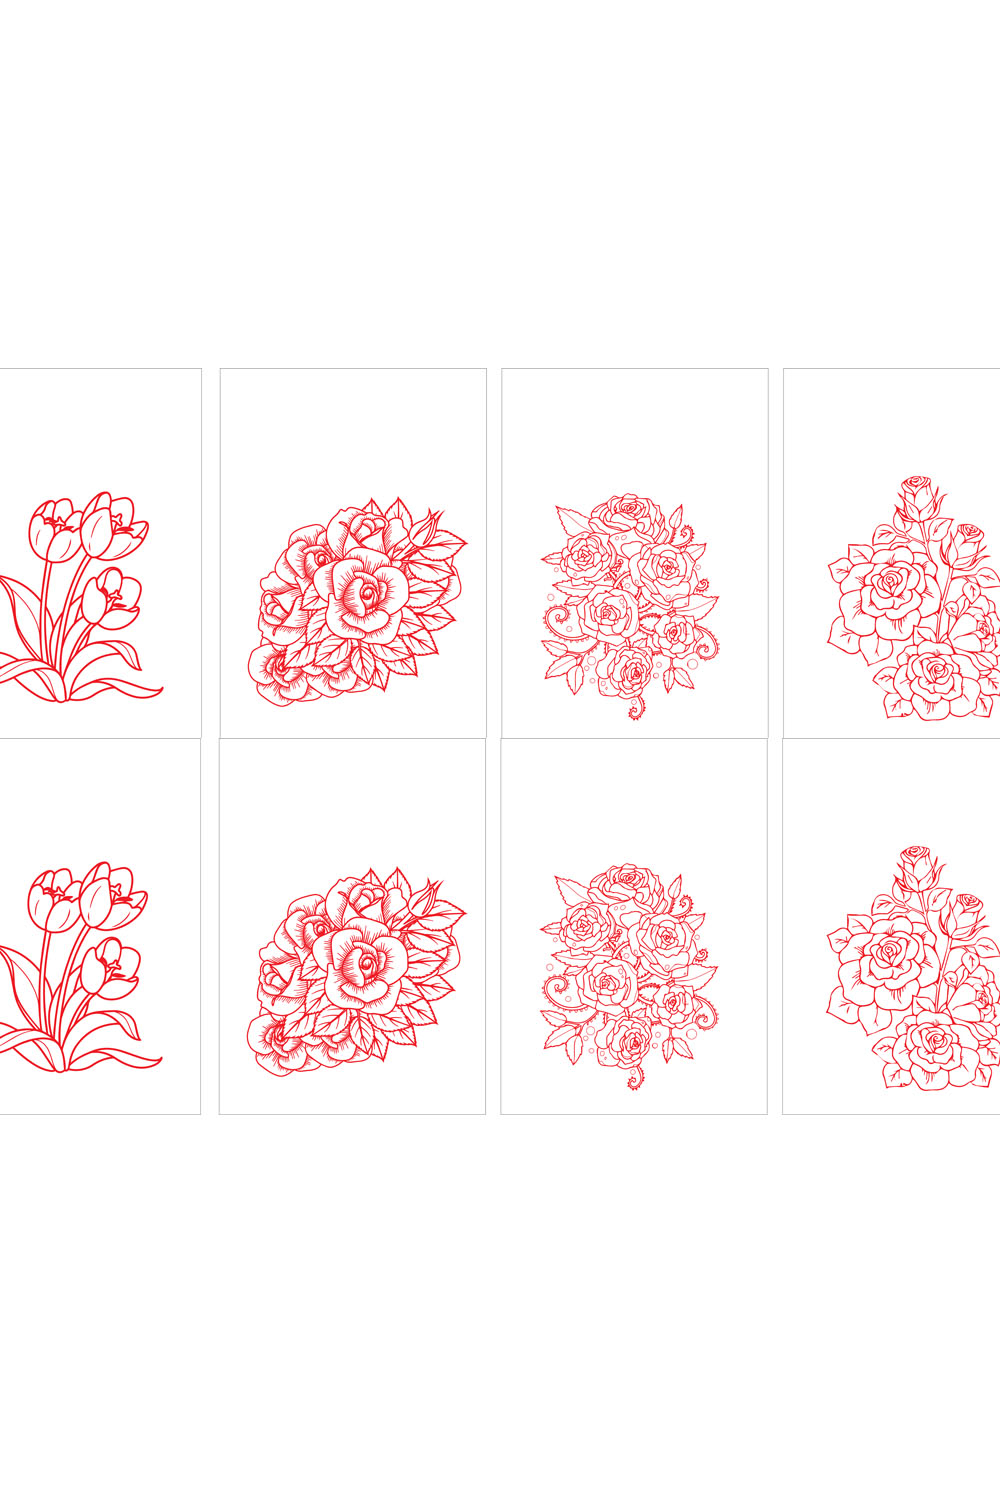 4 flower line drawings in red color suitable for drawing books, tattoos etc pinterest preview image.